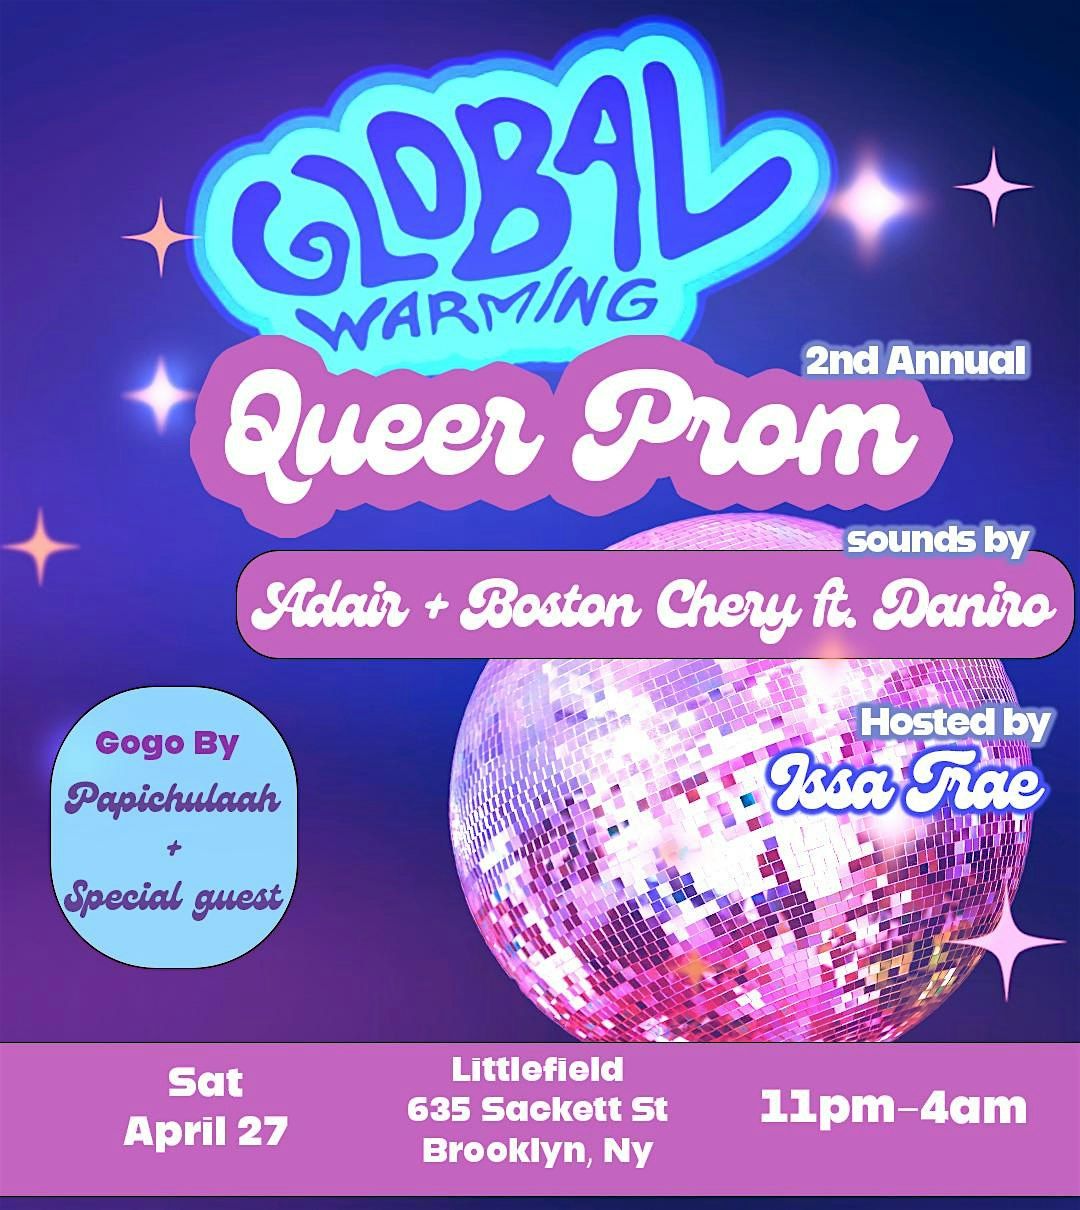 Global Warming's  2nd Annual Queer Prom!